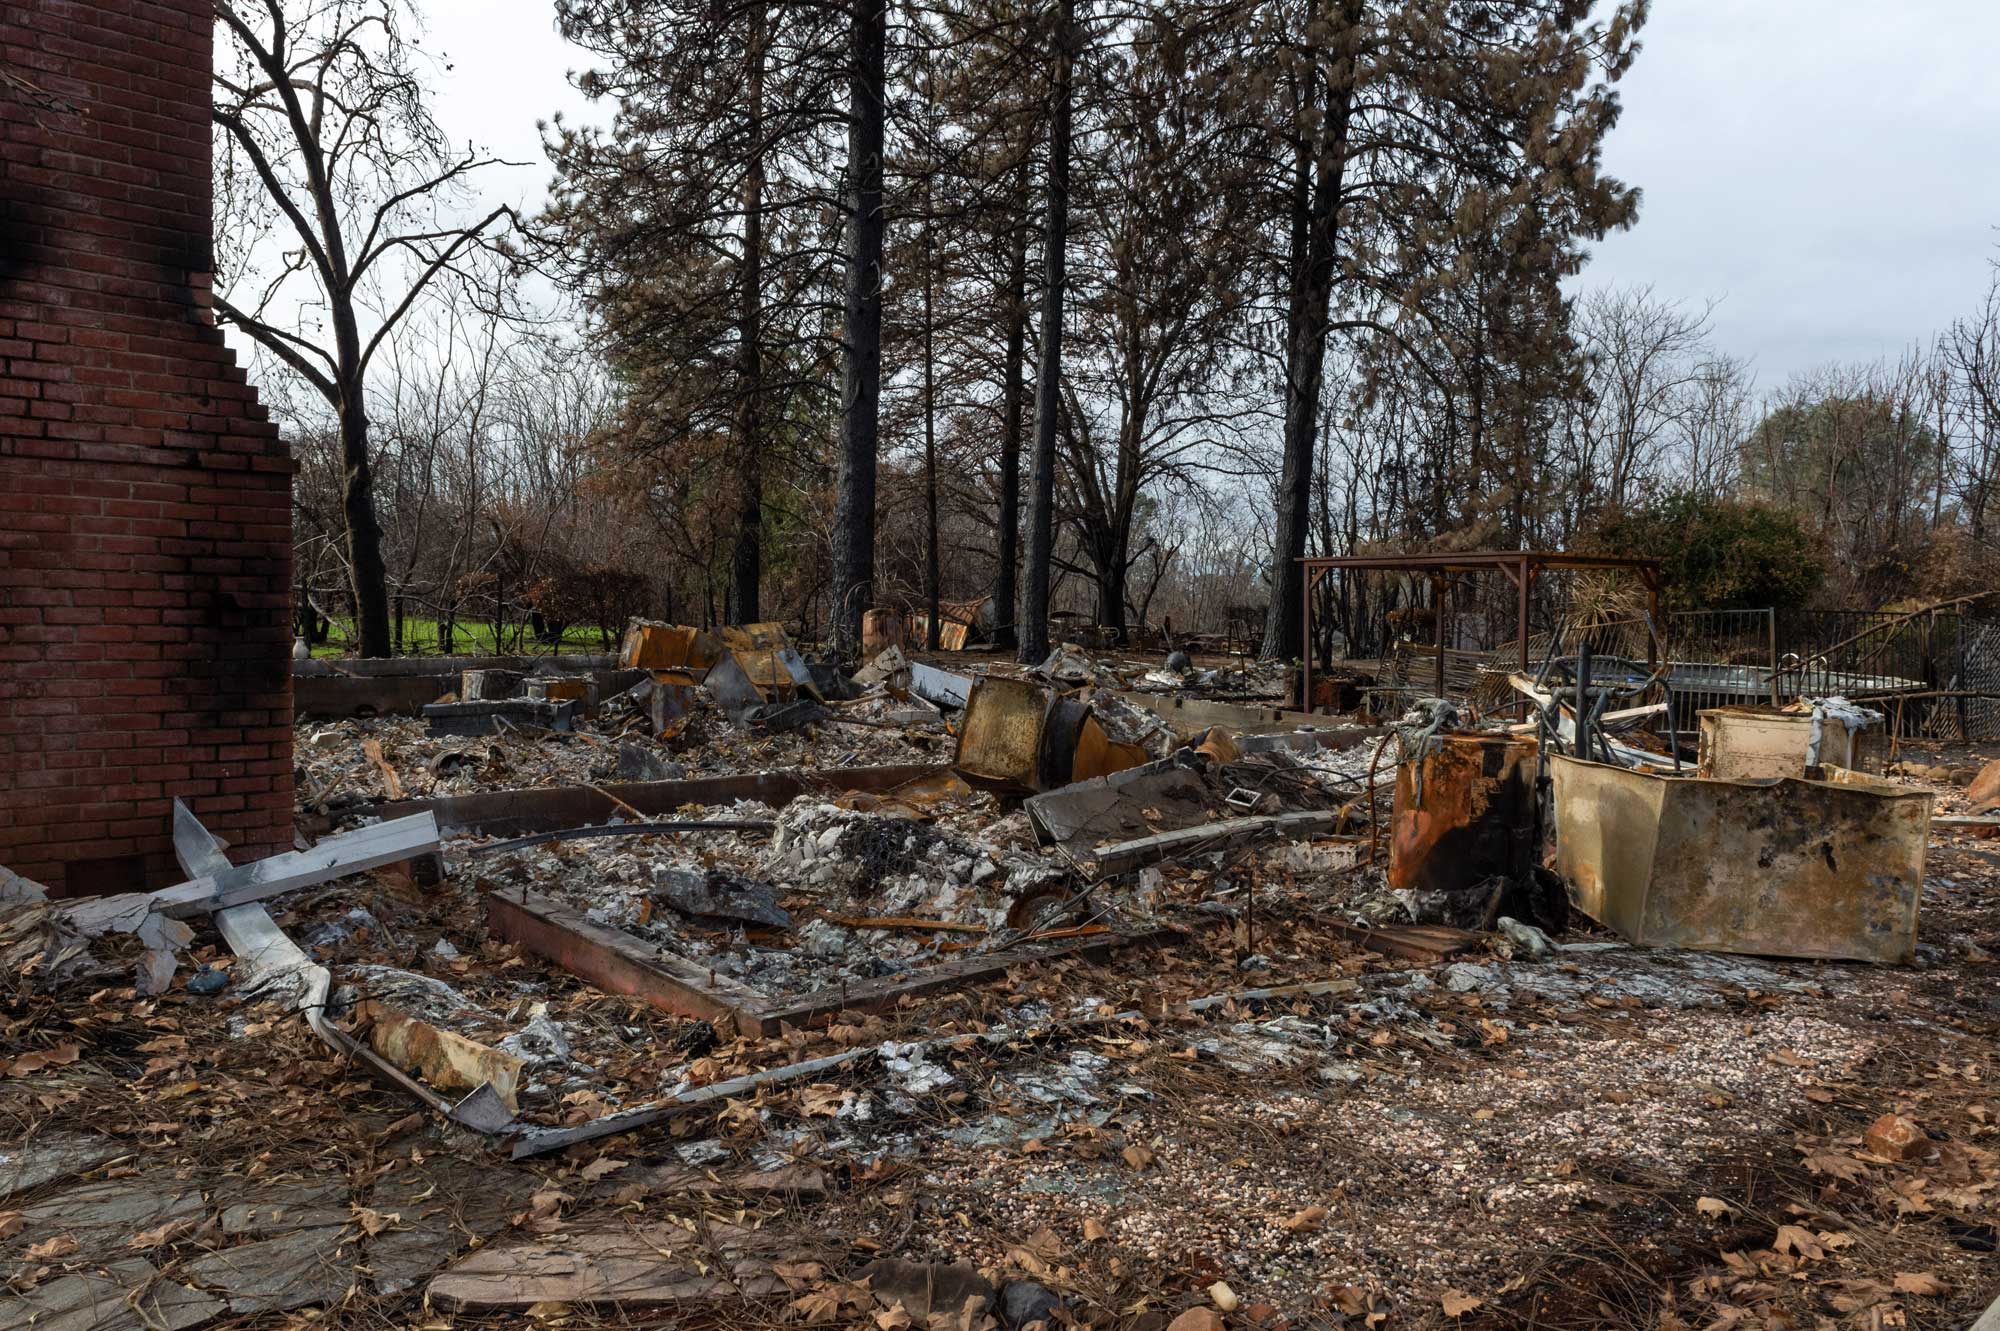 Photograph of the aftermath of the Camp Fire in Paradise, California, December 2018. A row of pine trees stands in the background. In the foreground are the charred remains of the contents of houses. To the left foreground, a portion of a scorched brick chimney from a house is still standing.